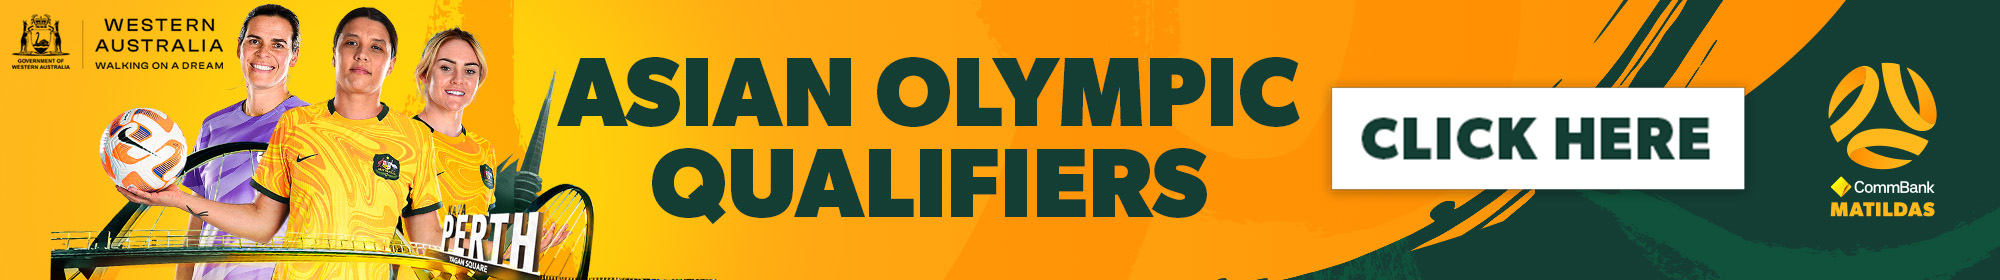 Mat_oly_qualifier